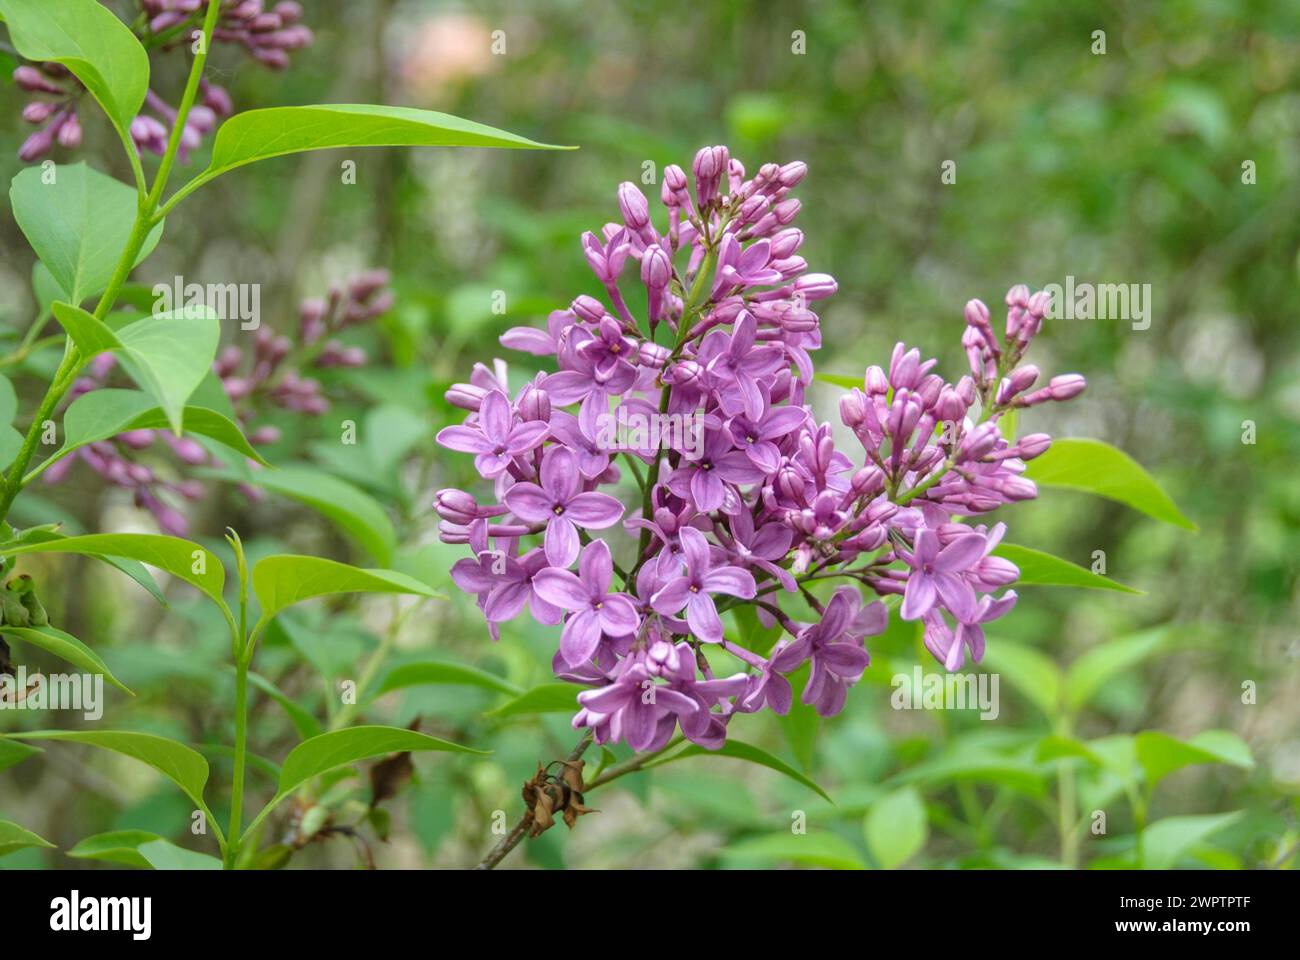 Royal lilac (Syringa x chinensis 'Saugeana'), Saxon State Institute for Agriculture, Saxony, Germany Stock Photo